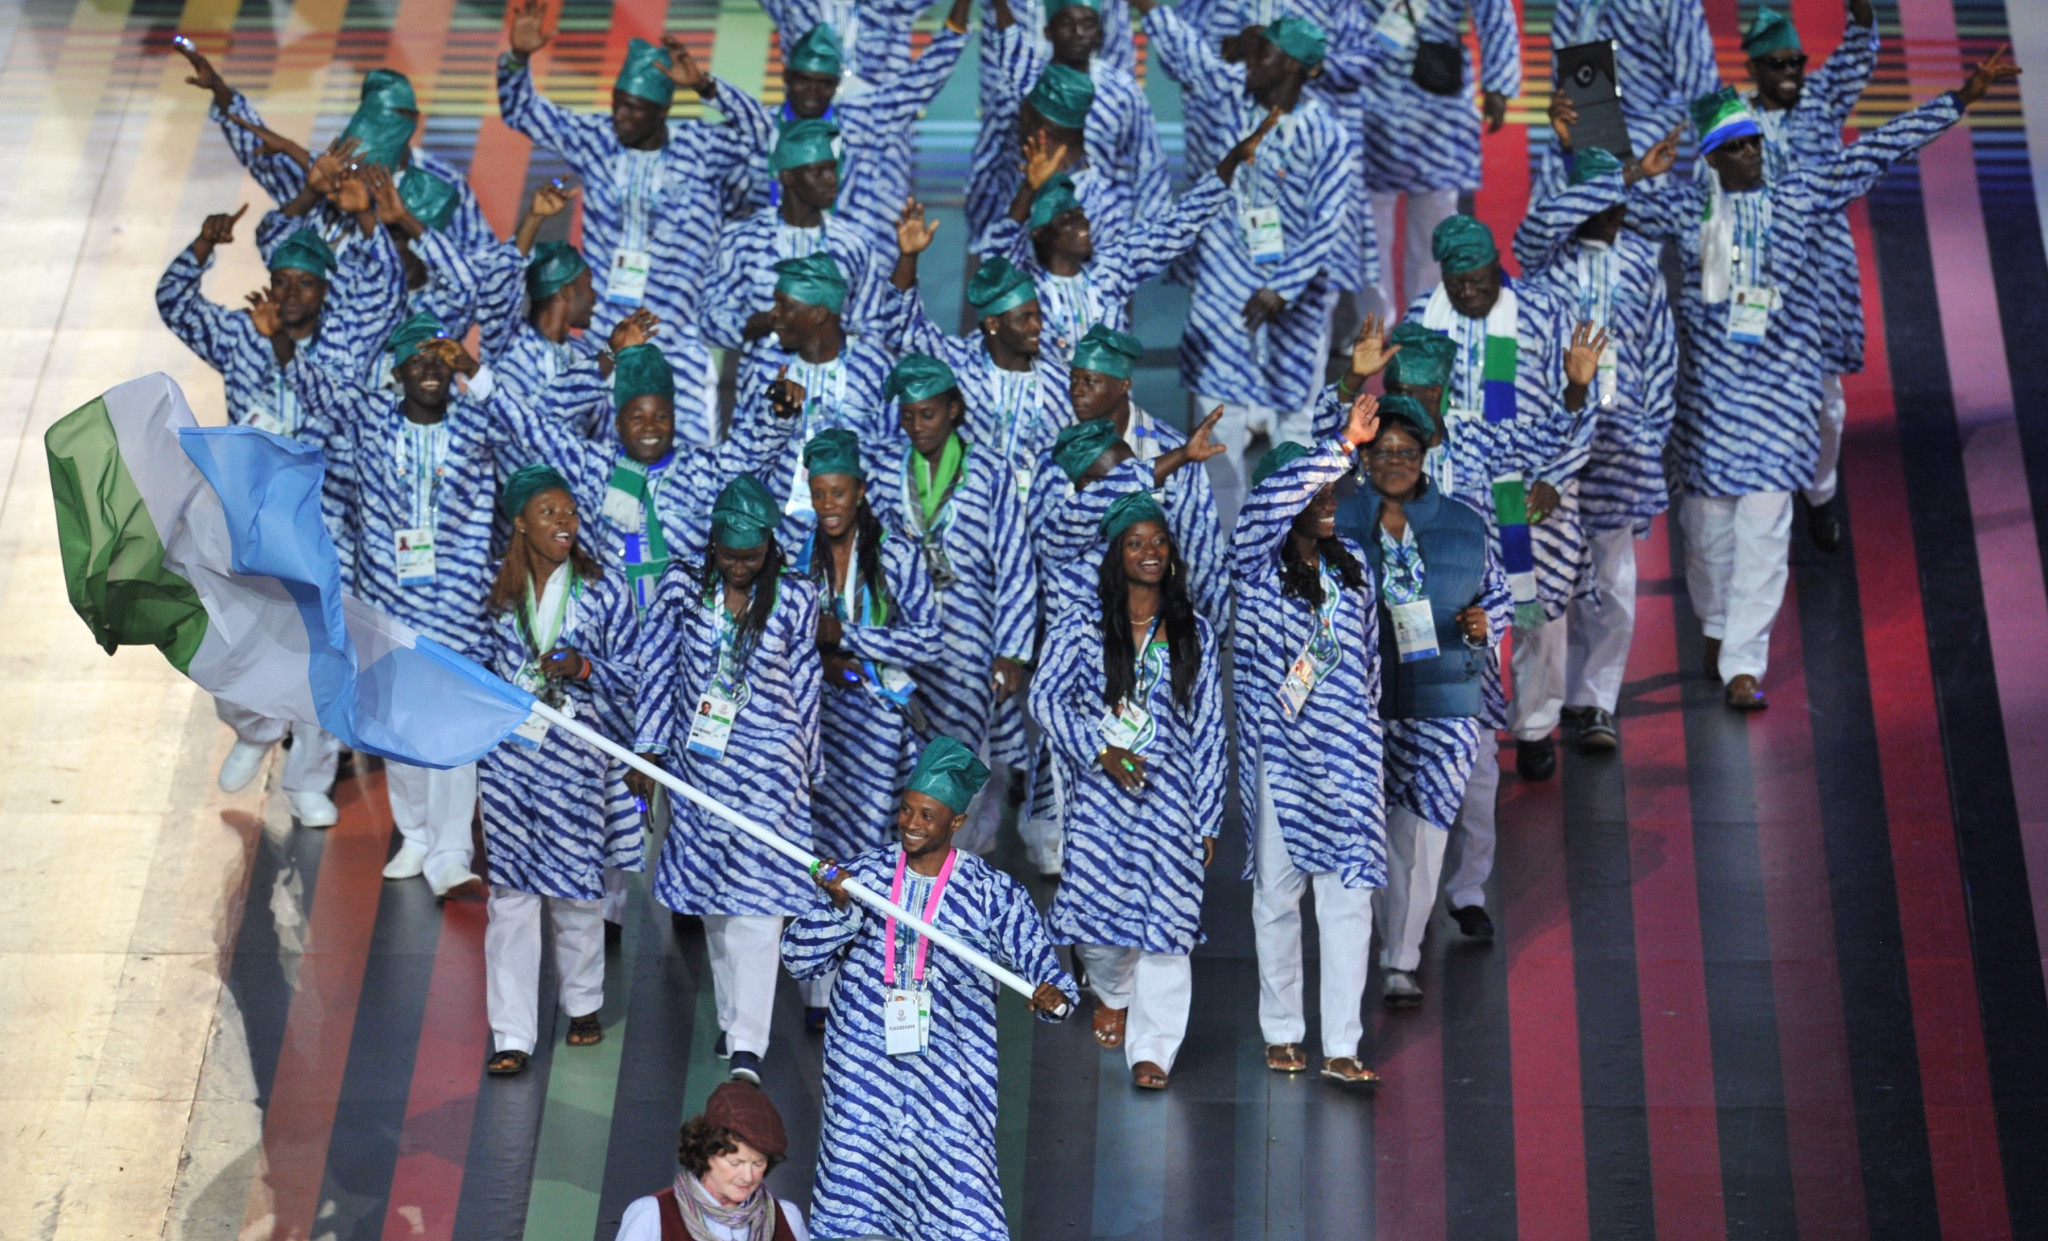 Sierra Leone's team at the Glasgow 2014 Commonwealth Games, during which a state of emergency was declared due to Ebola back home ©Getty Images